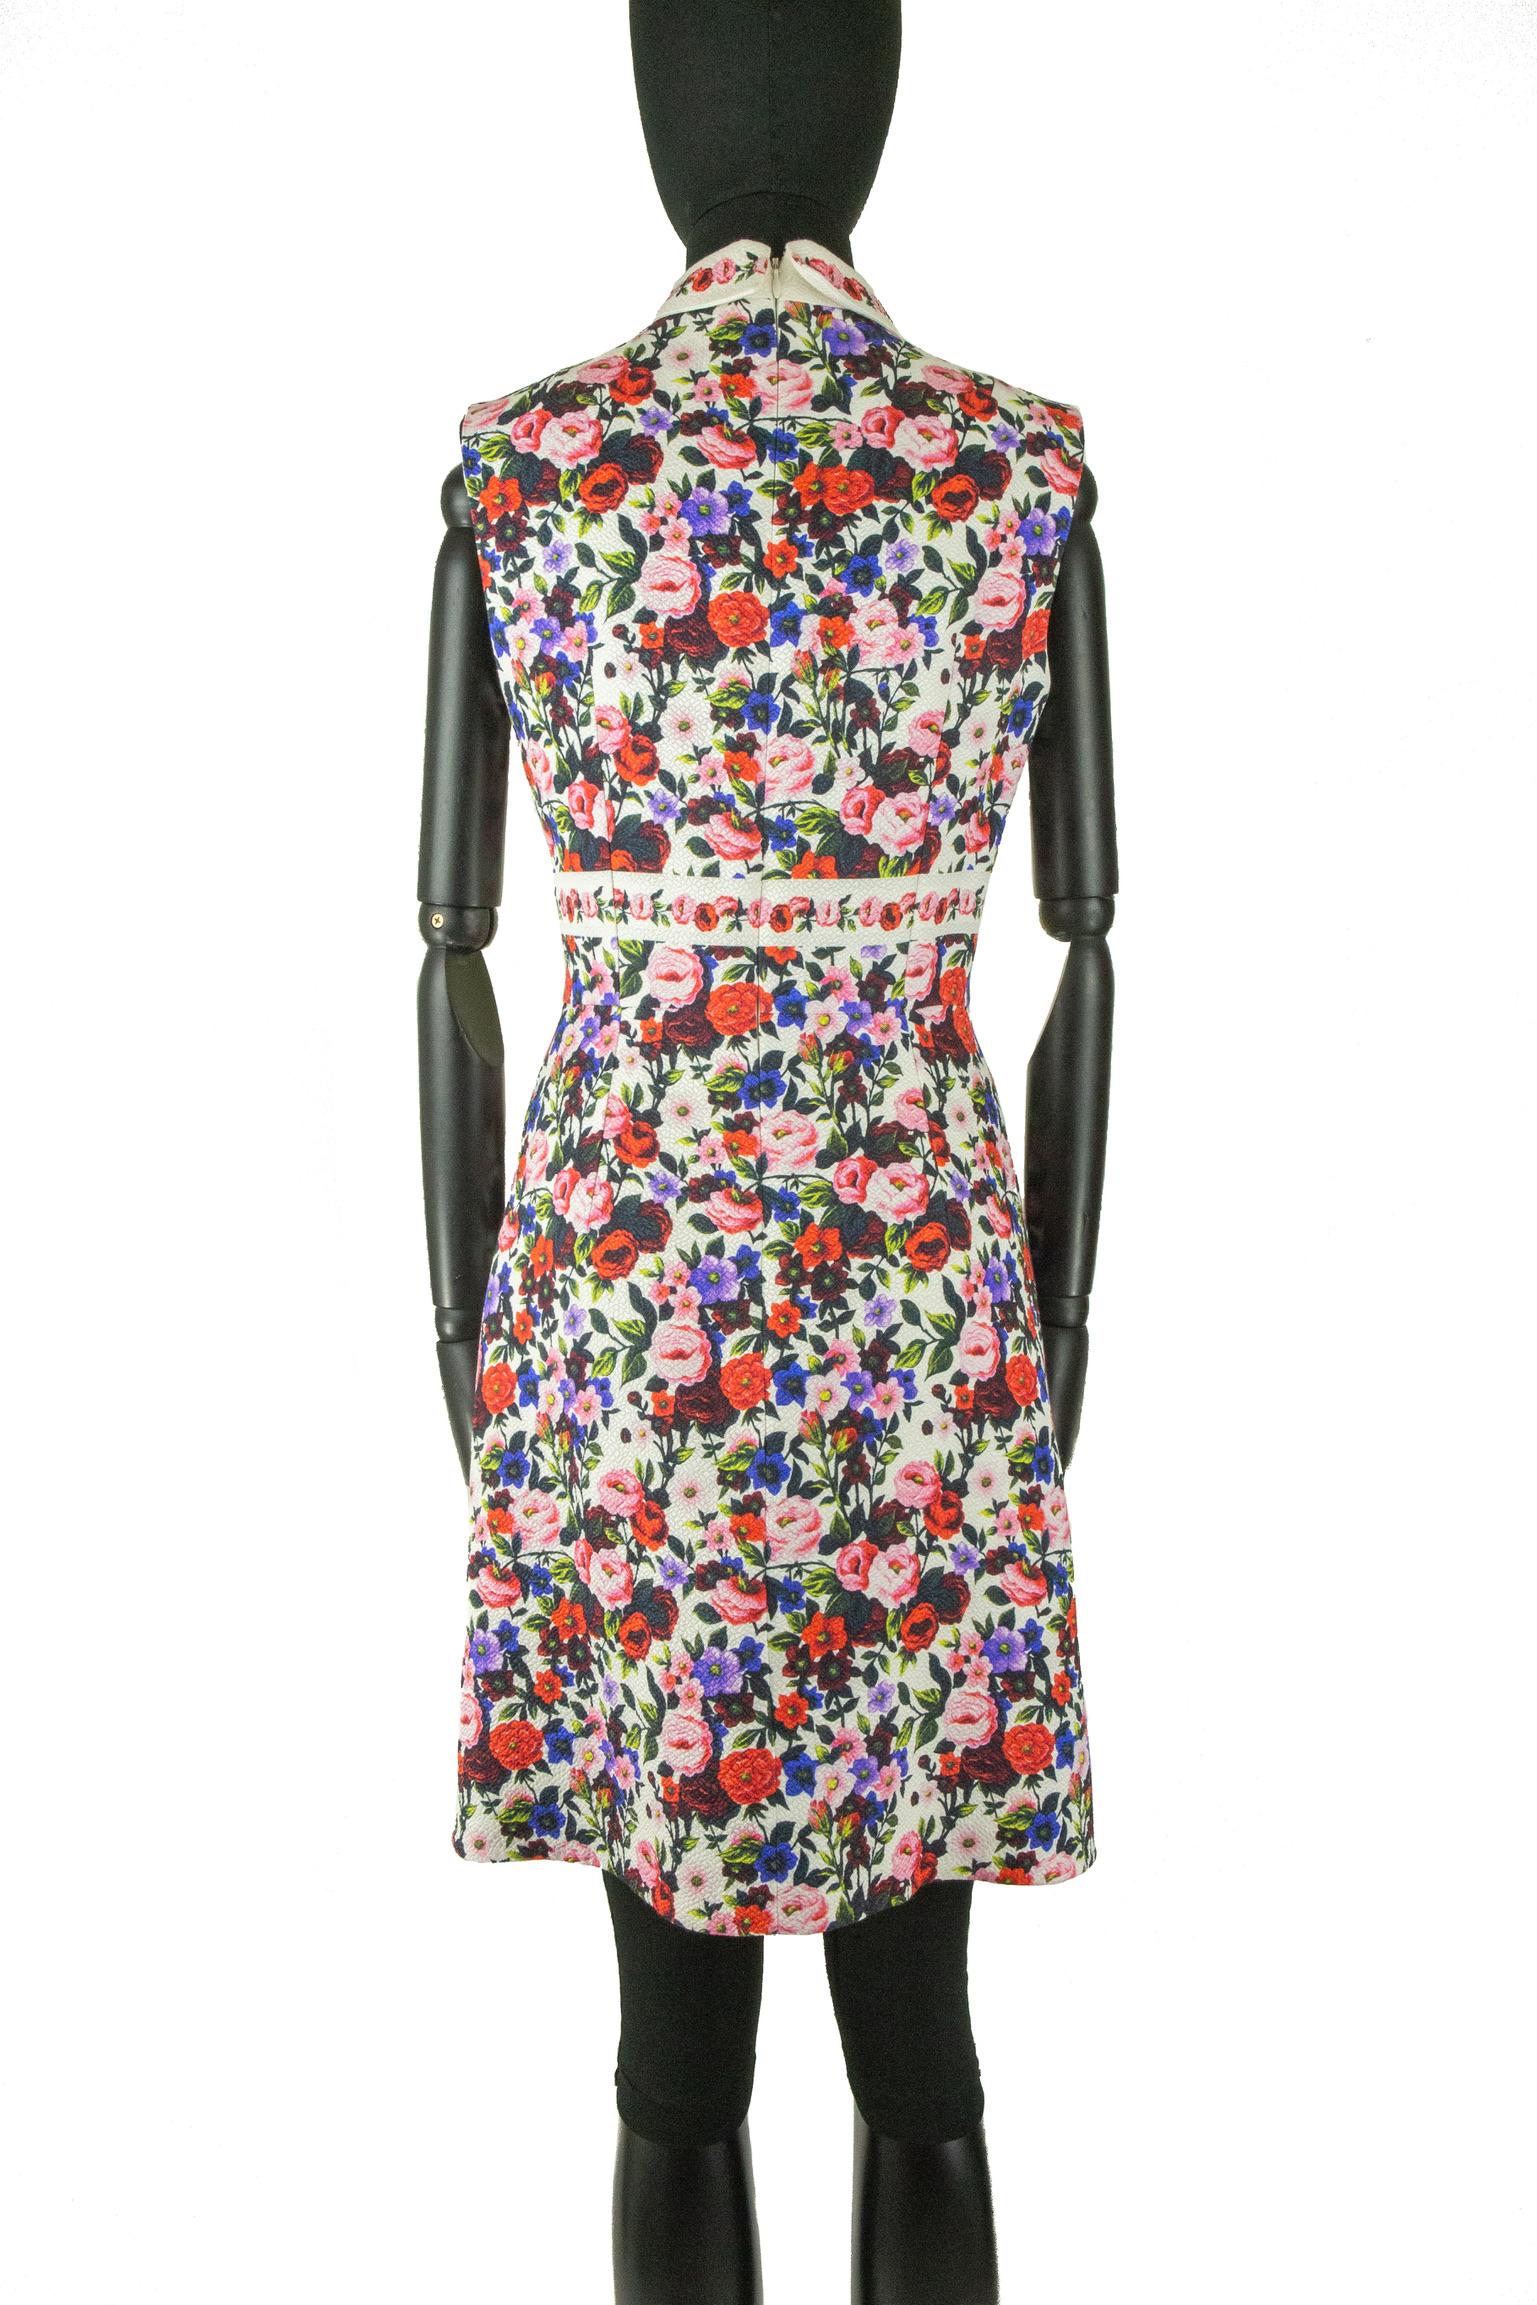 Yellow Mary Katrantzou Floral Patterned Skater Dress For Sale